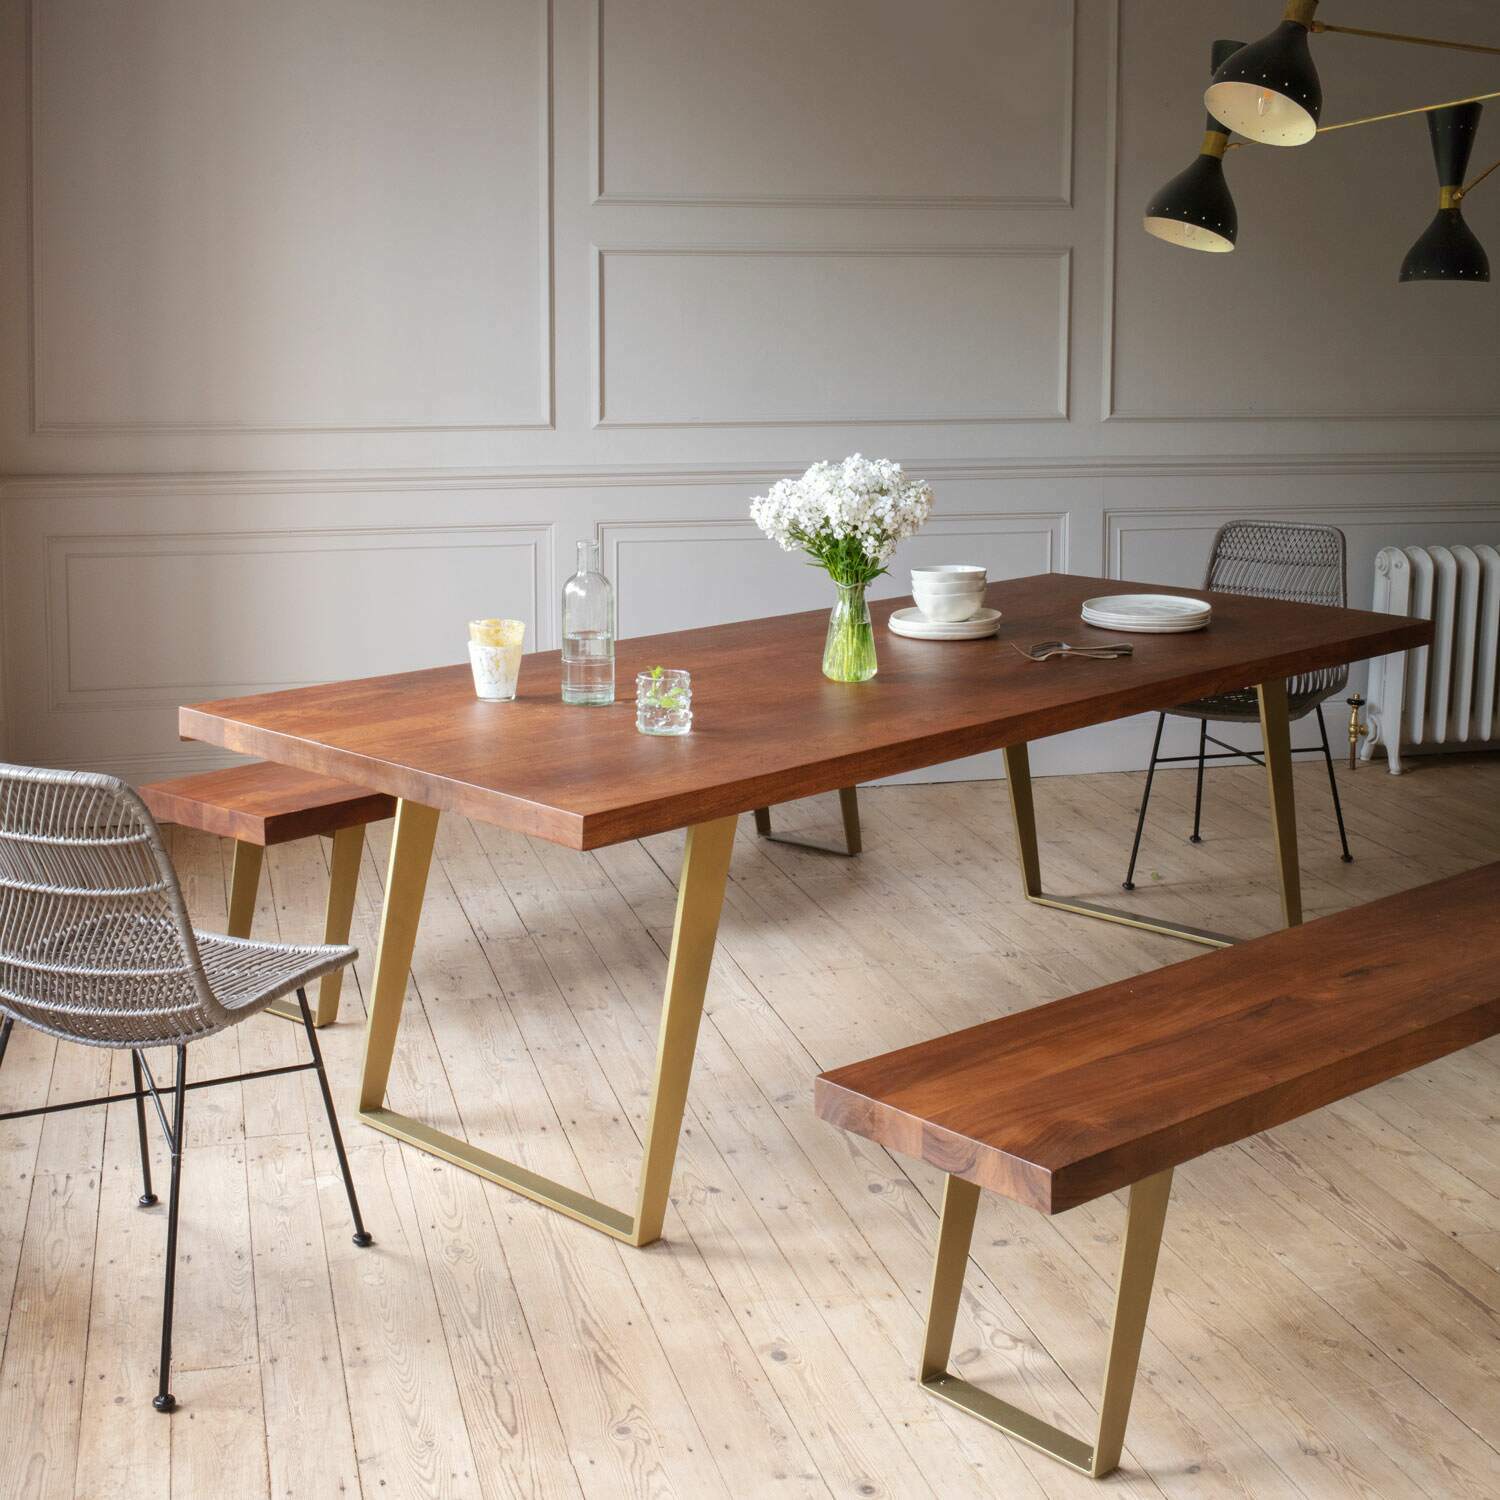 Photo of Graham and green max brass eight seater dining table